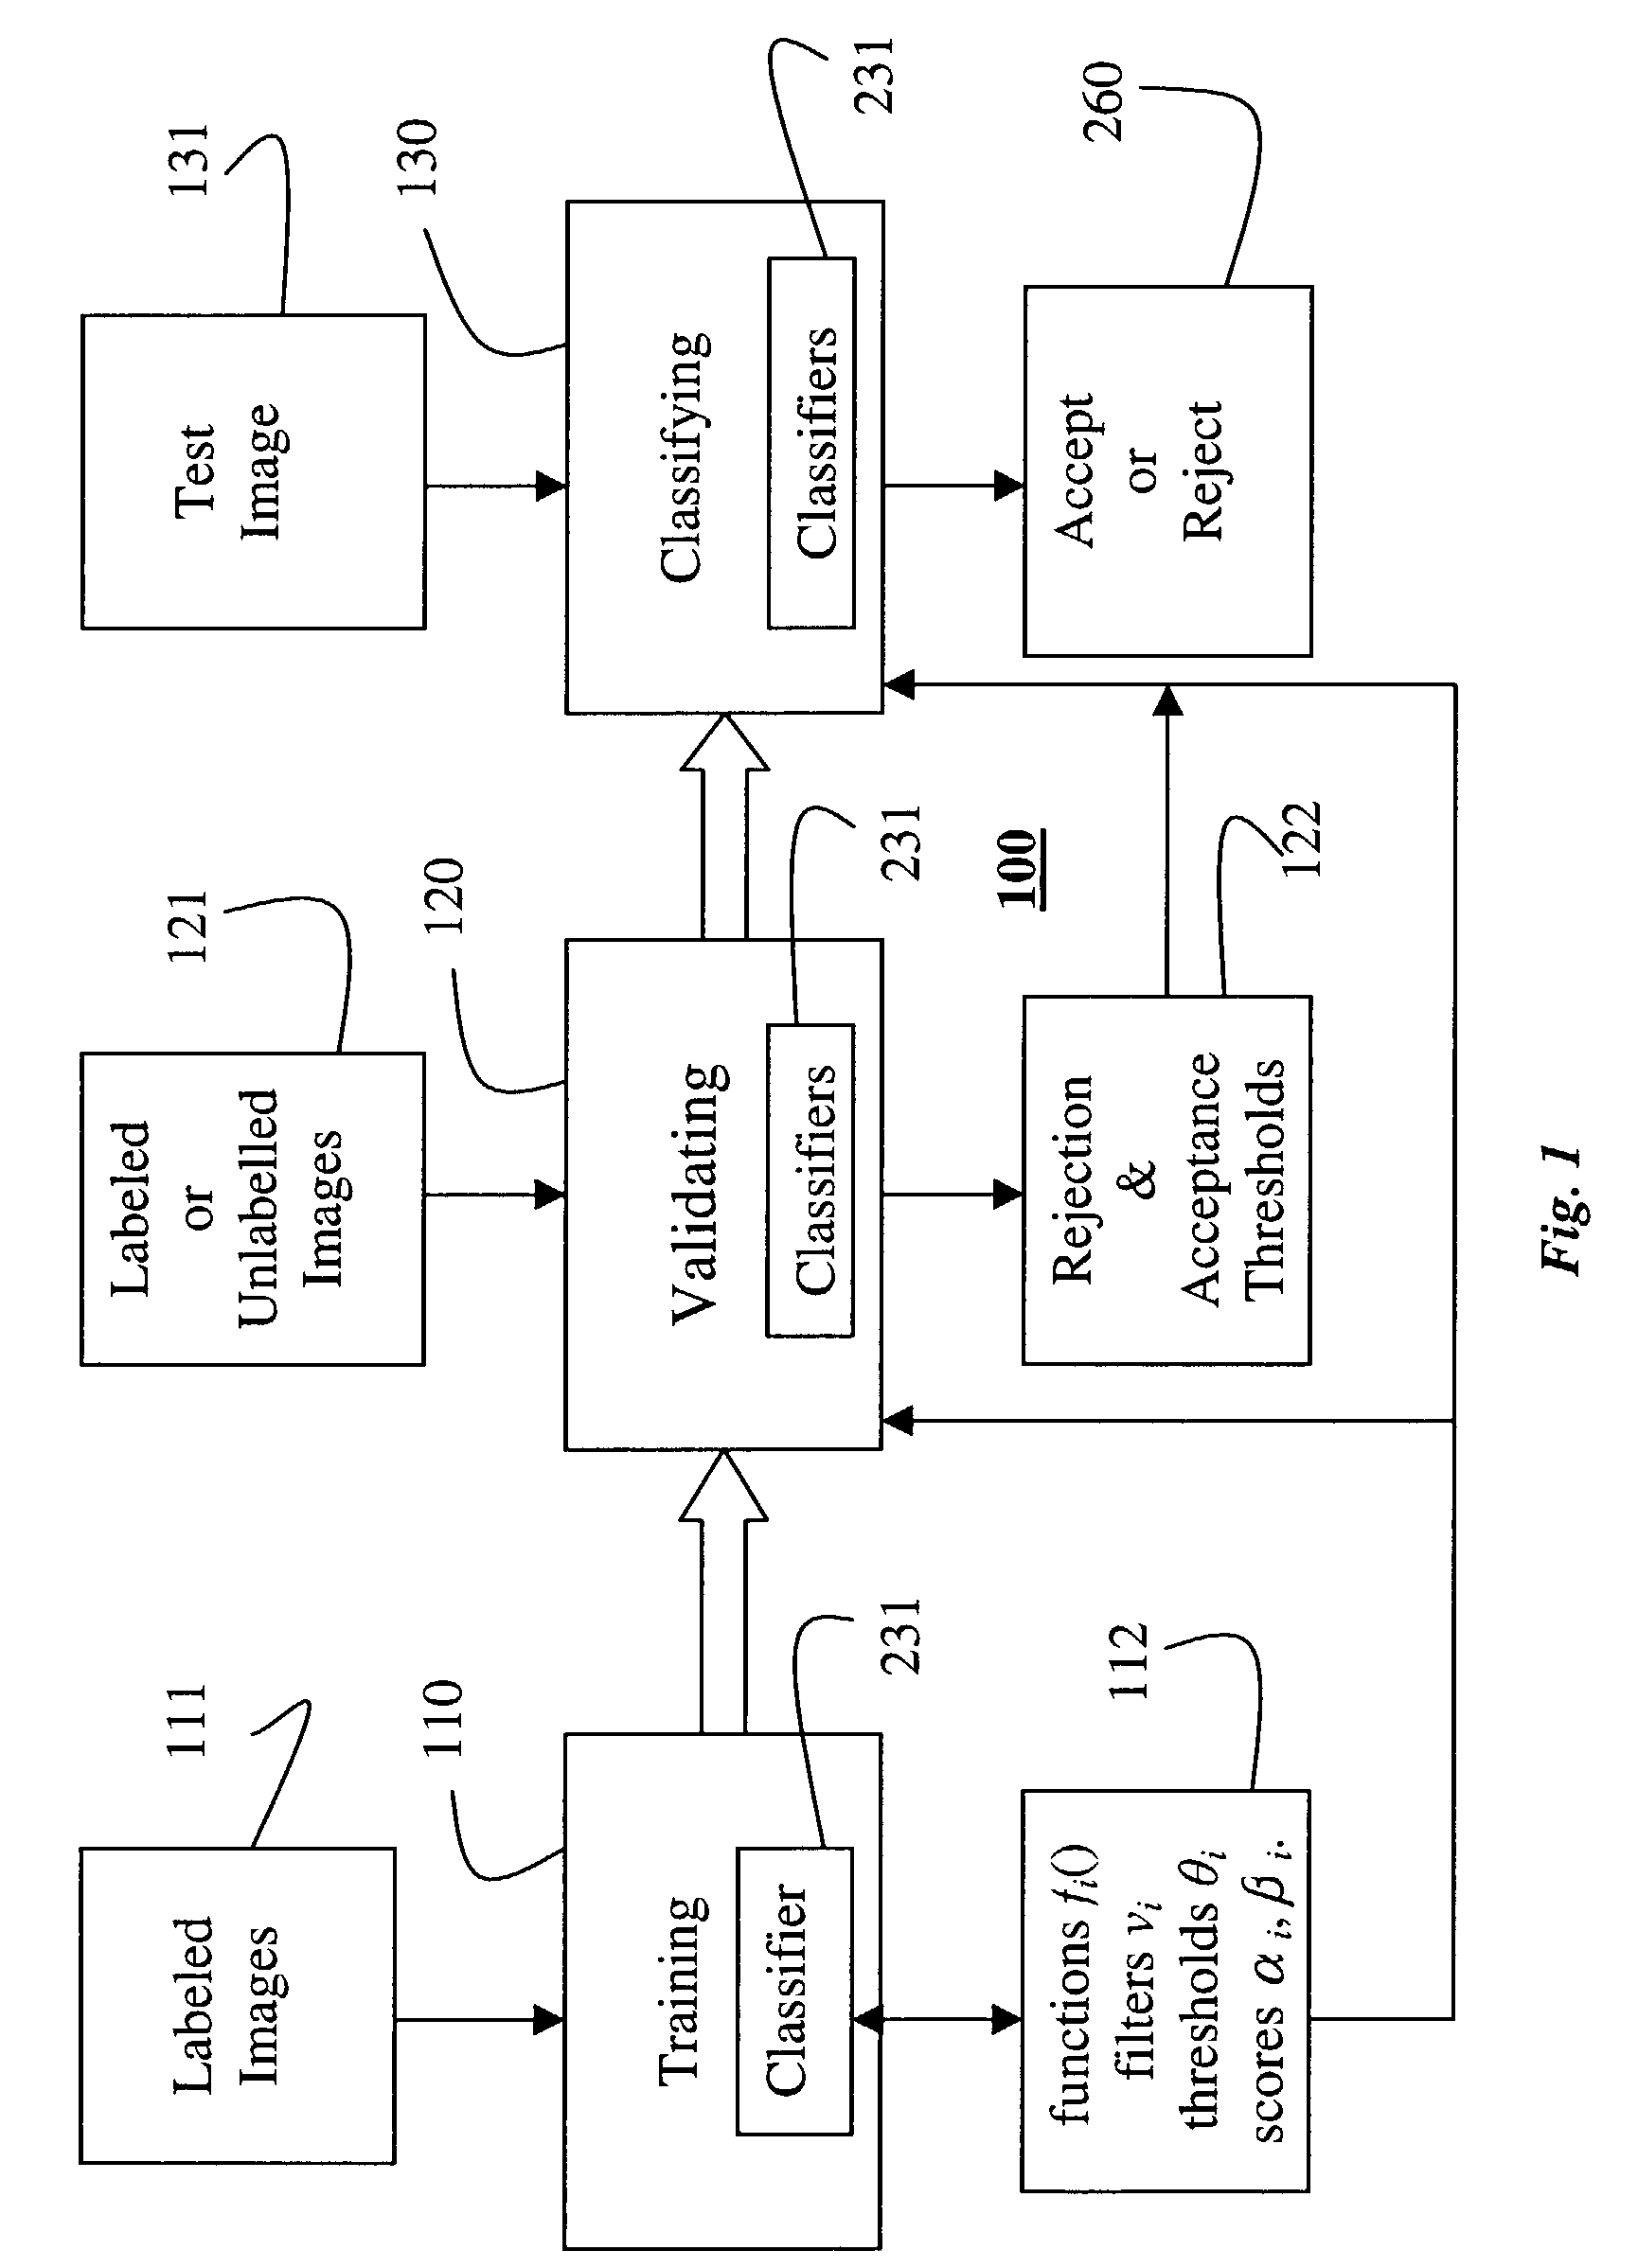 System and method for detecting objects in images